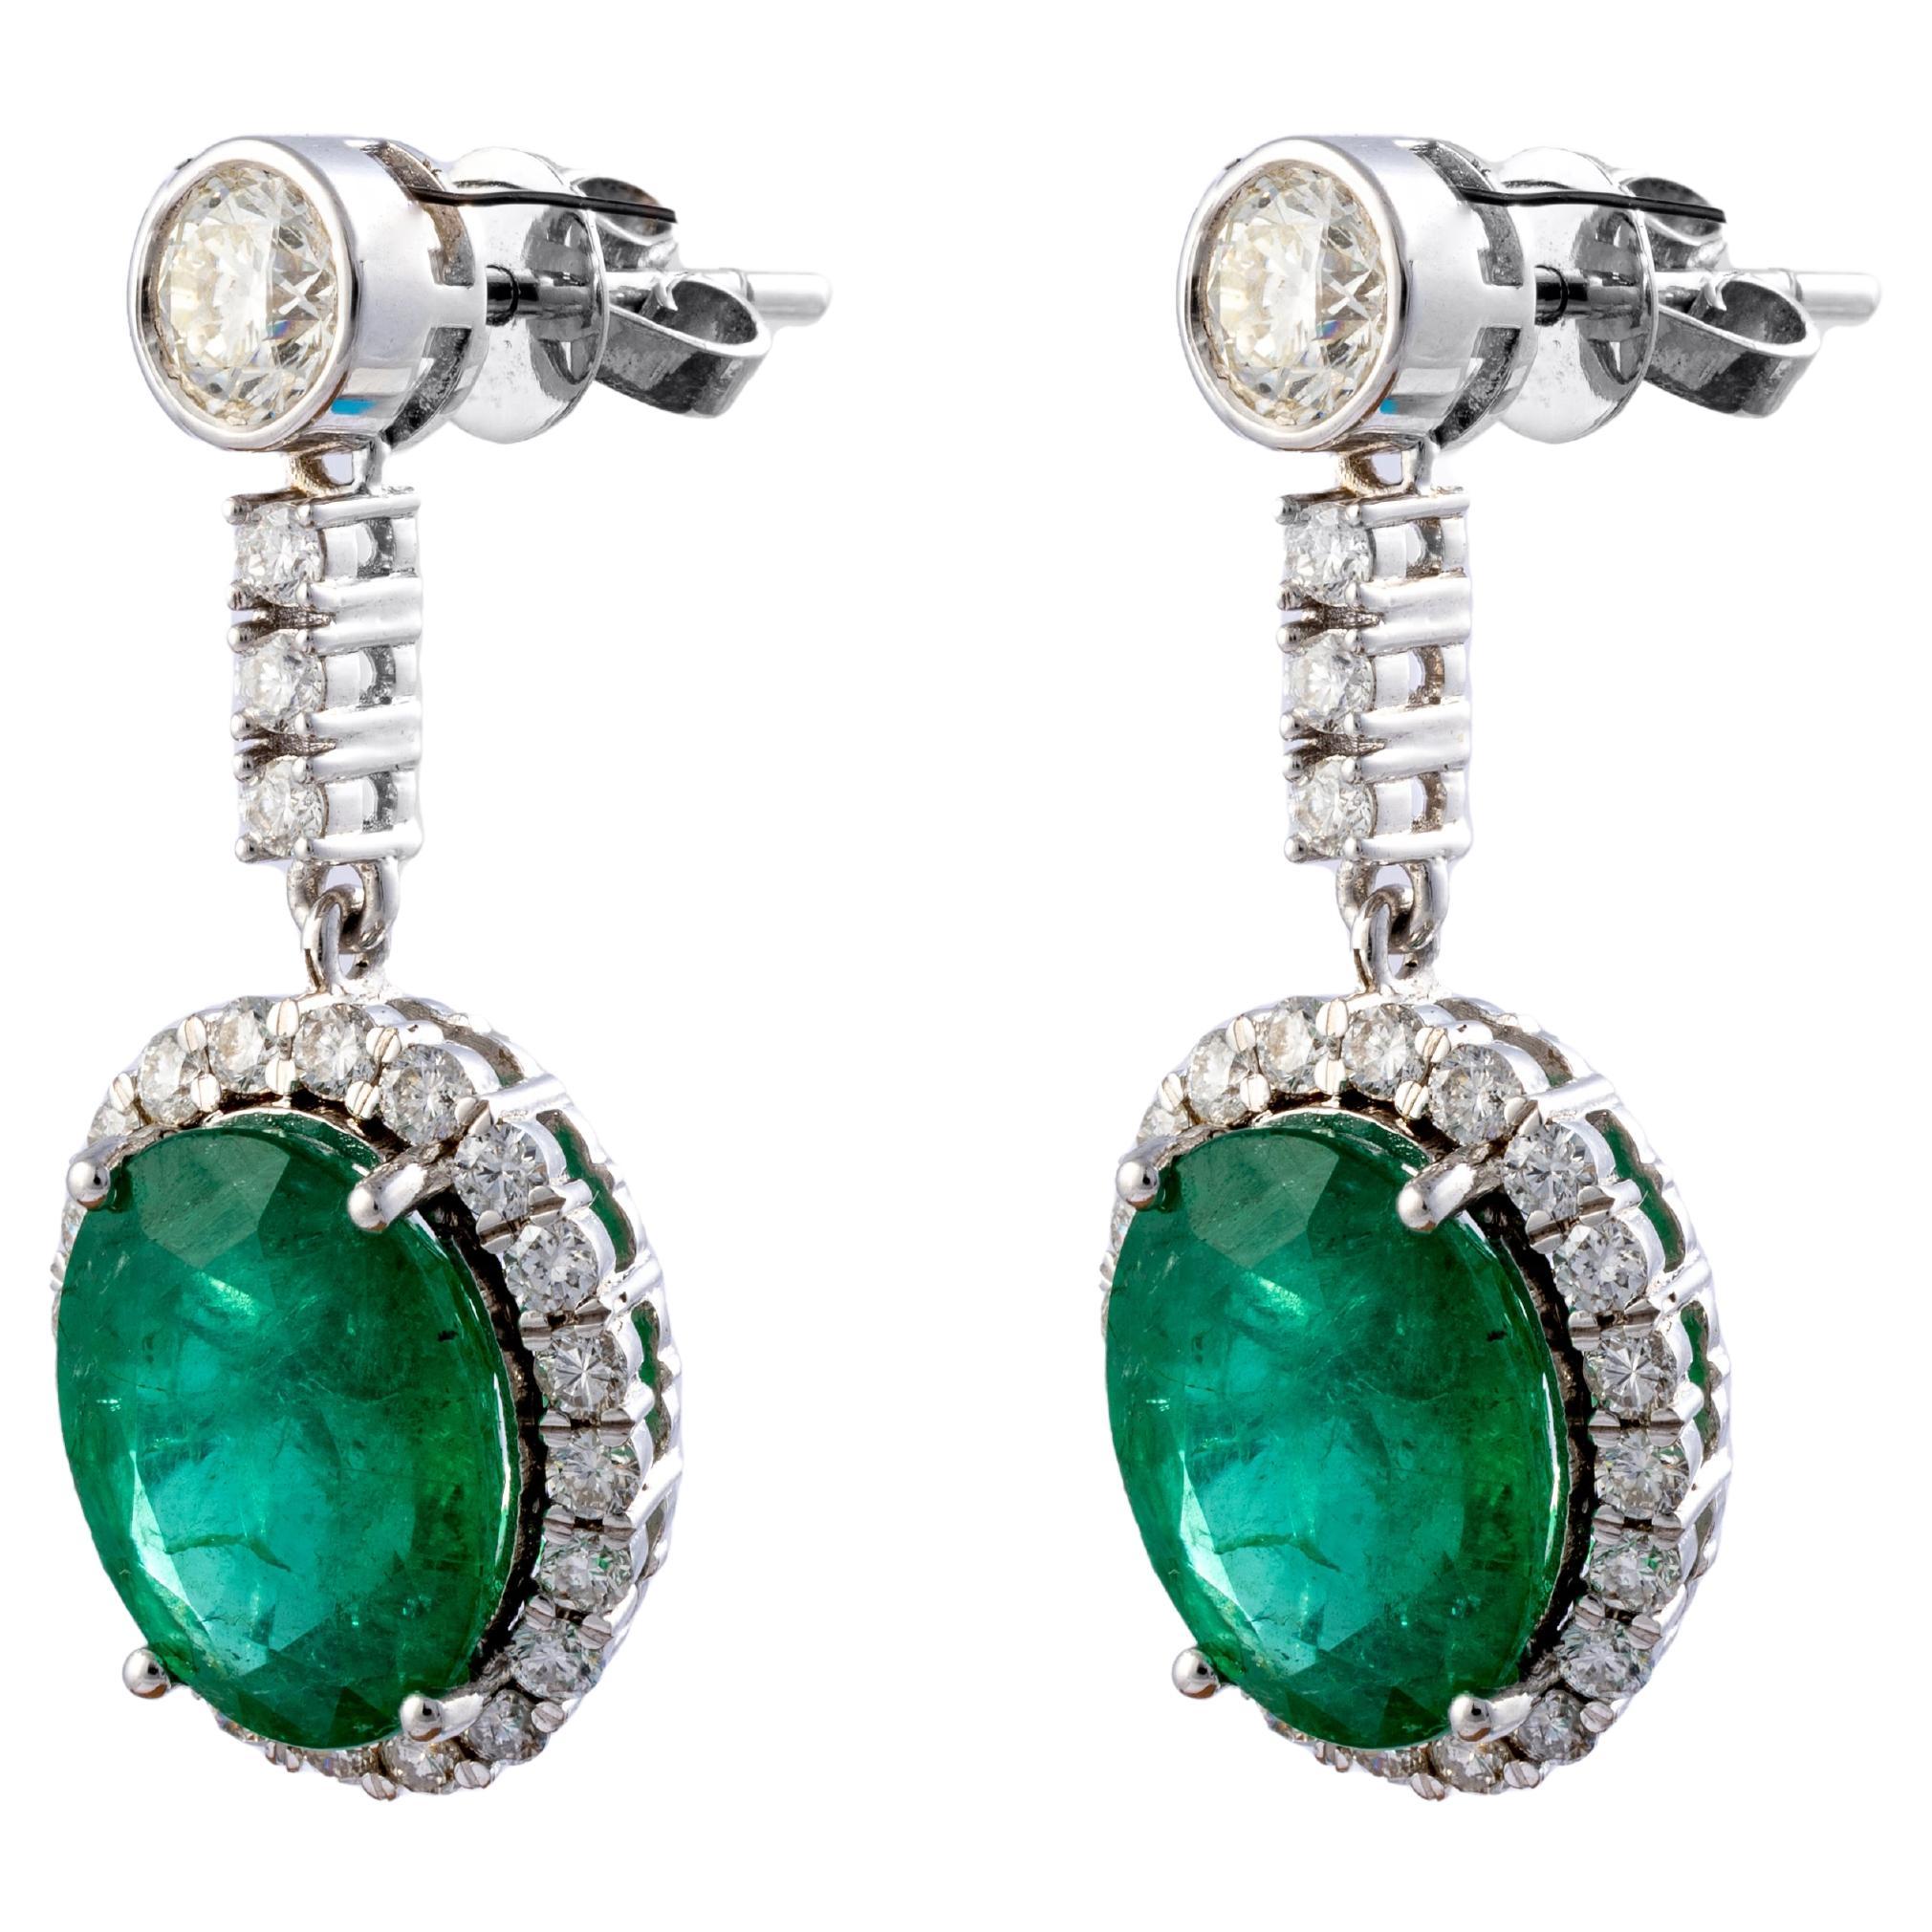 Natural Zambian Emerald 9.65cts  with 2.42cts Diamond earring and 14k Gold